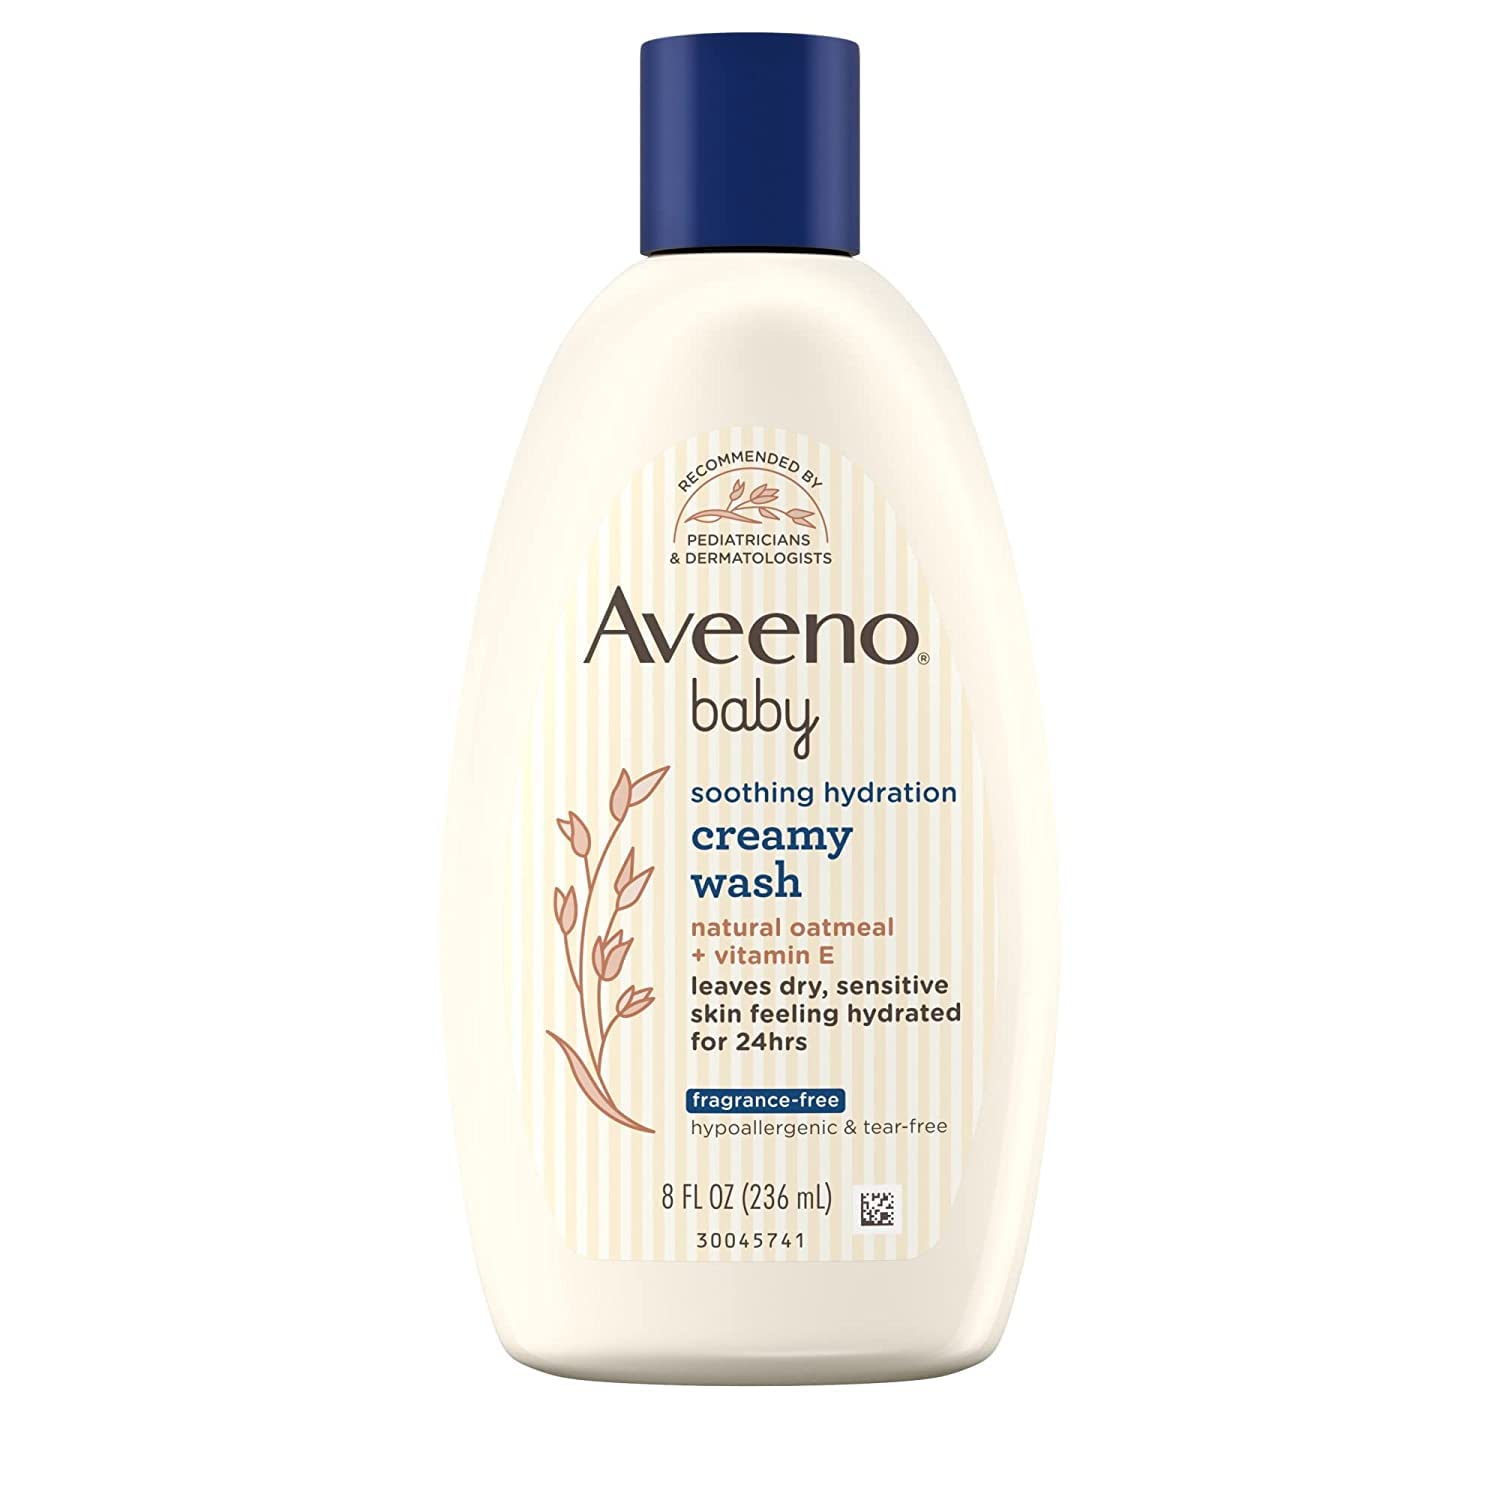 Aveeno Baby Soothing Hydration Creamy Body Wash with Natural Oatmeal for Dry & Sensitive Skin, Hypoallergenic, Fragrance, Paraben & Tear Free Formula, 8 Fl Oz